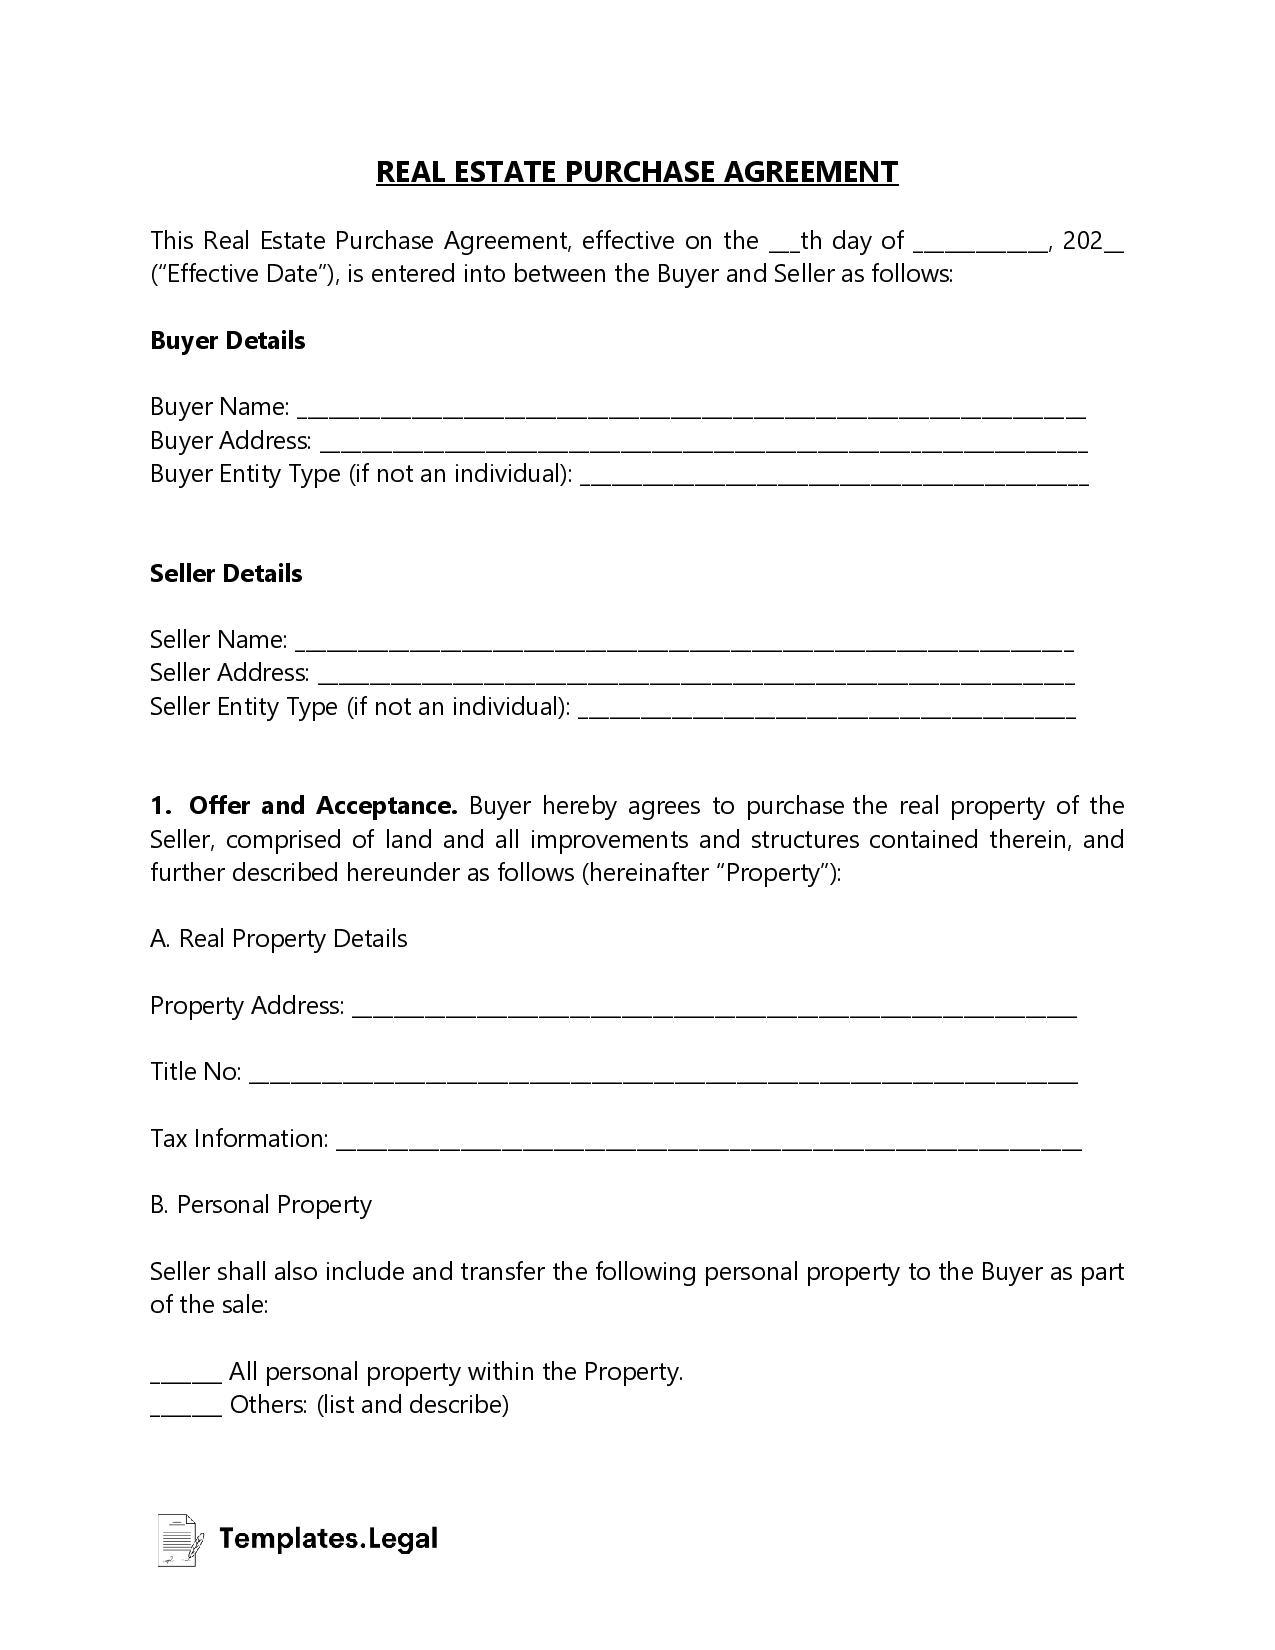 Real Estate Purchase Agreement - Templates.Legal